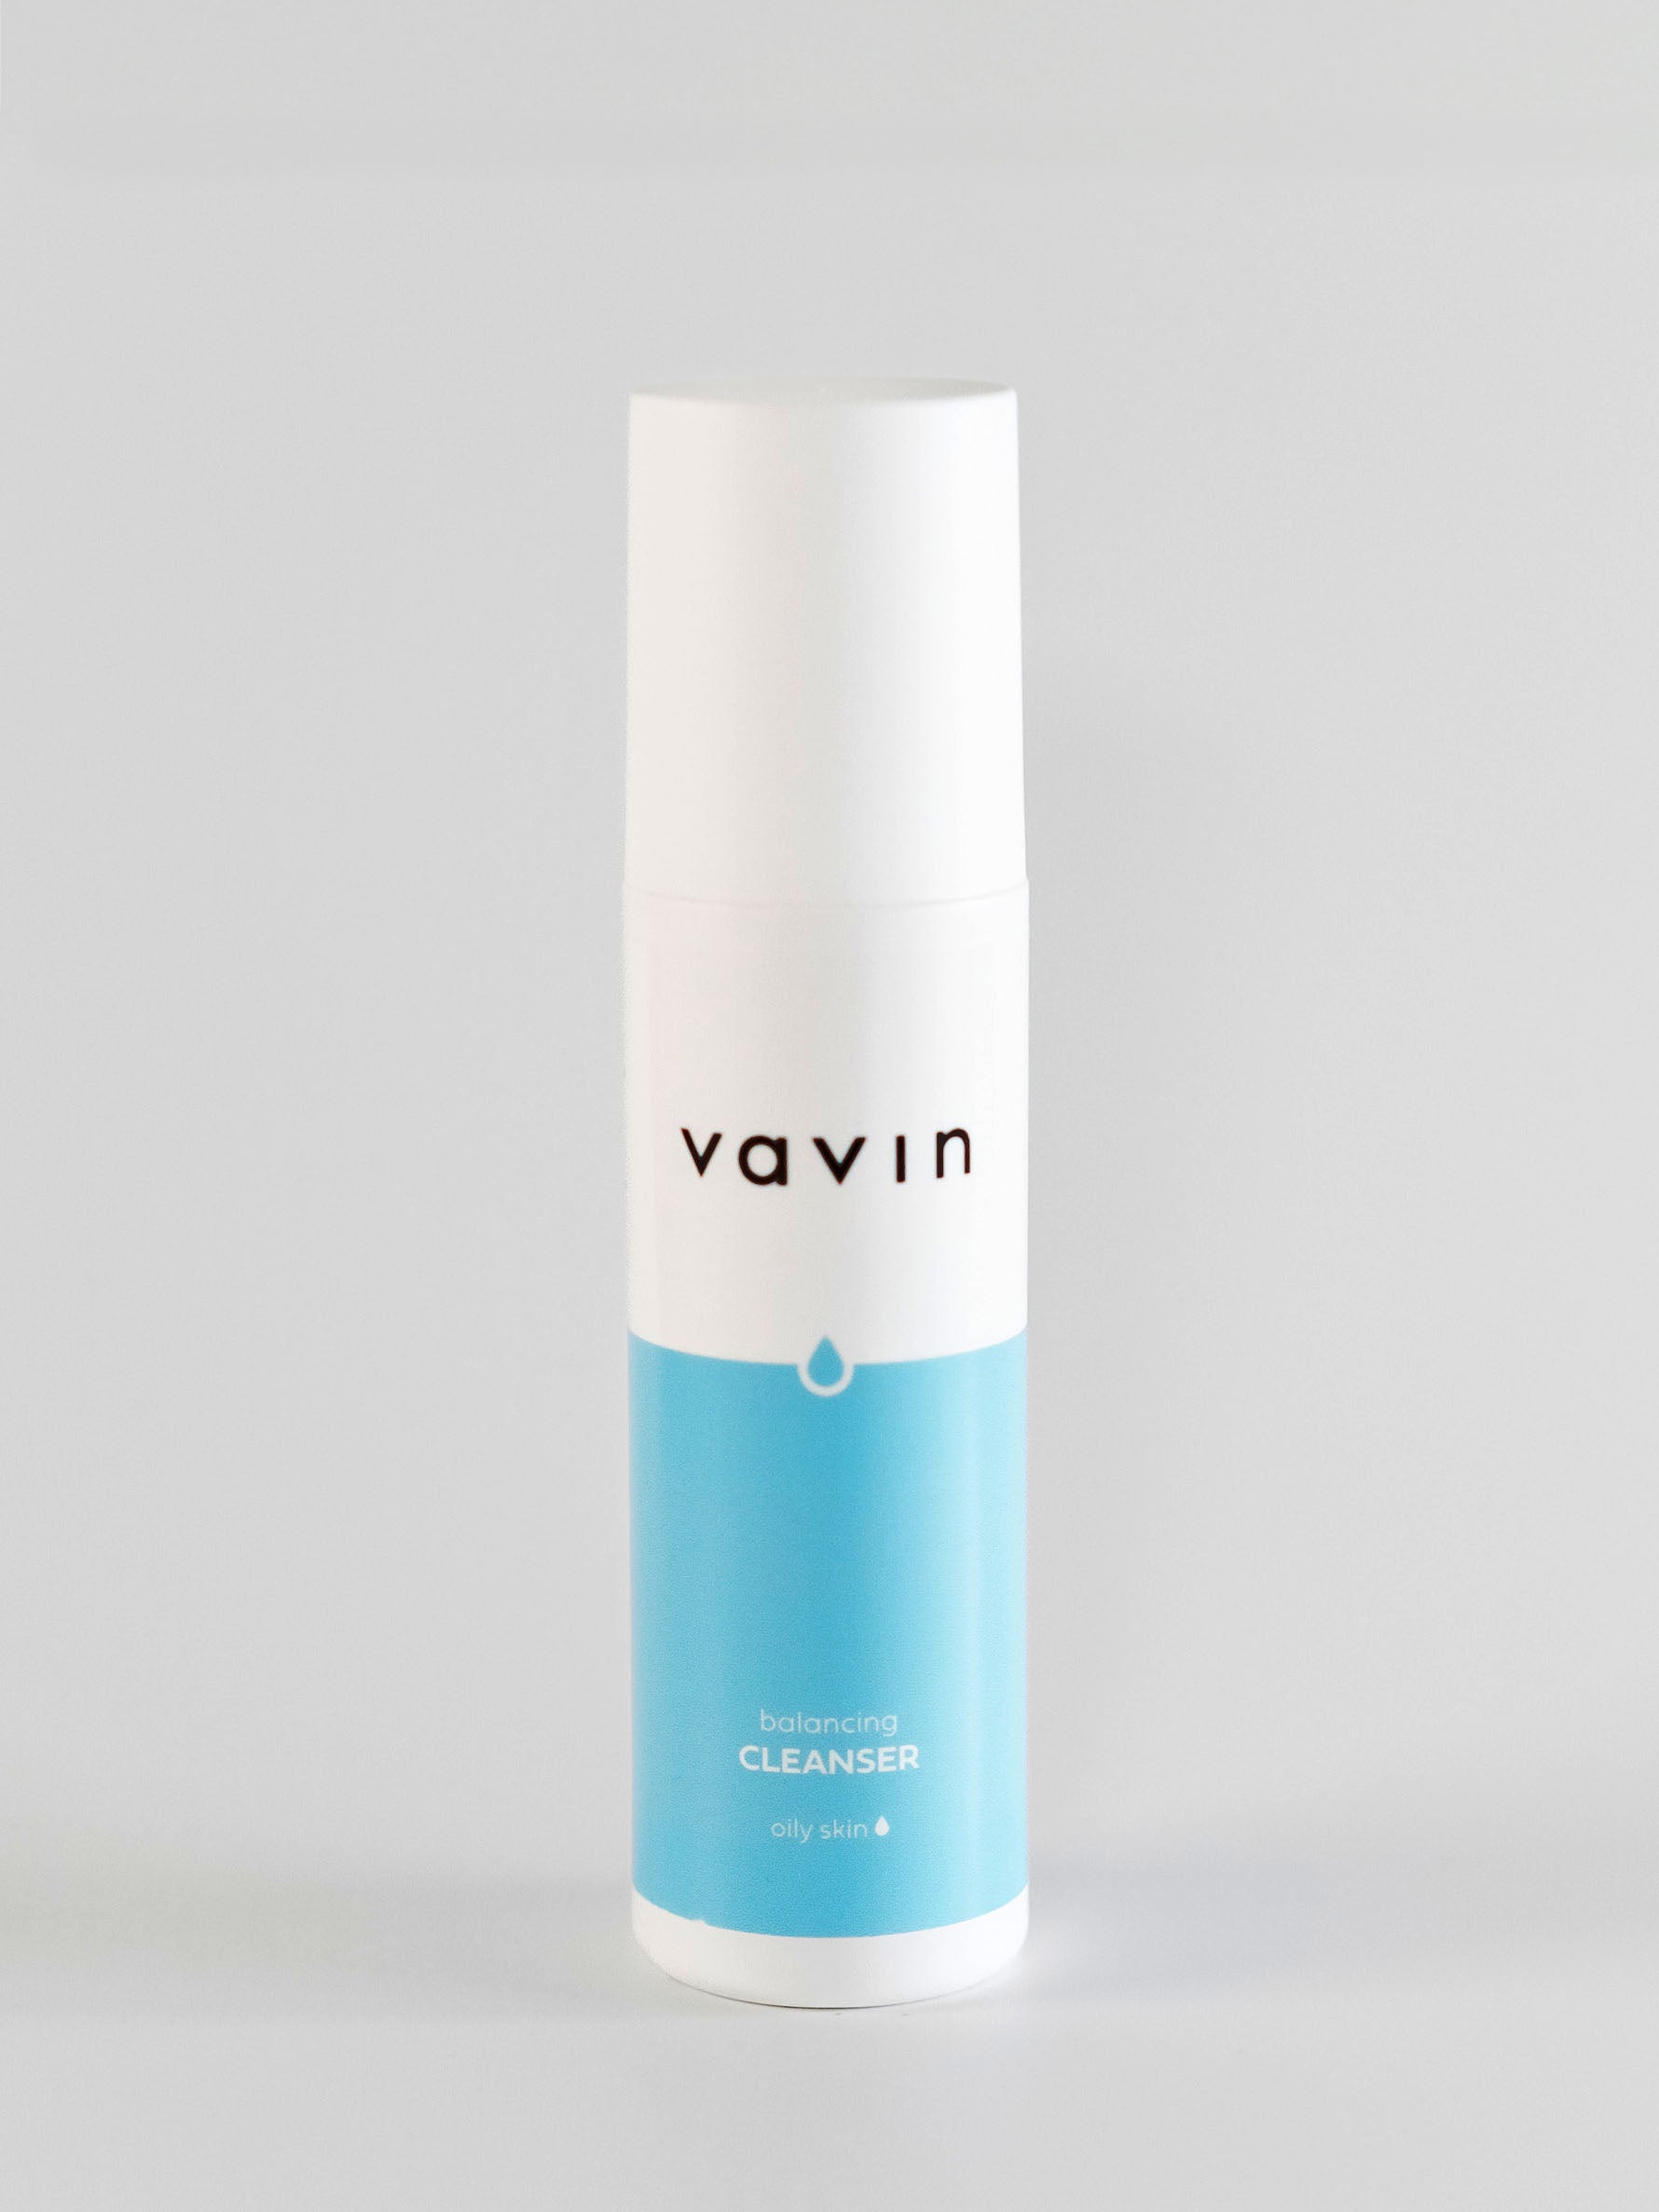 Balancing Cleanser - Oily Skin (170ml)